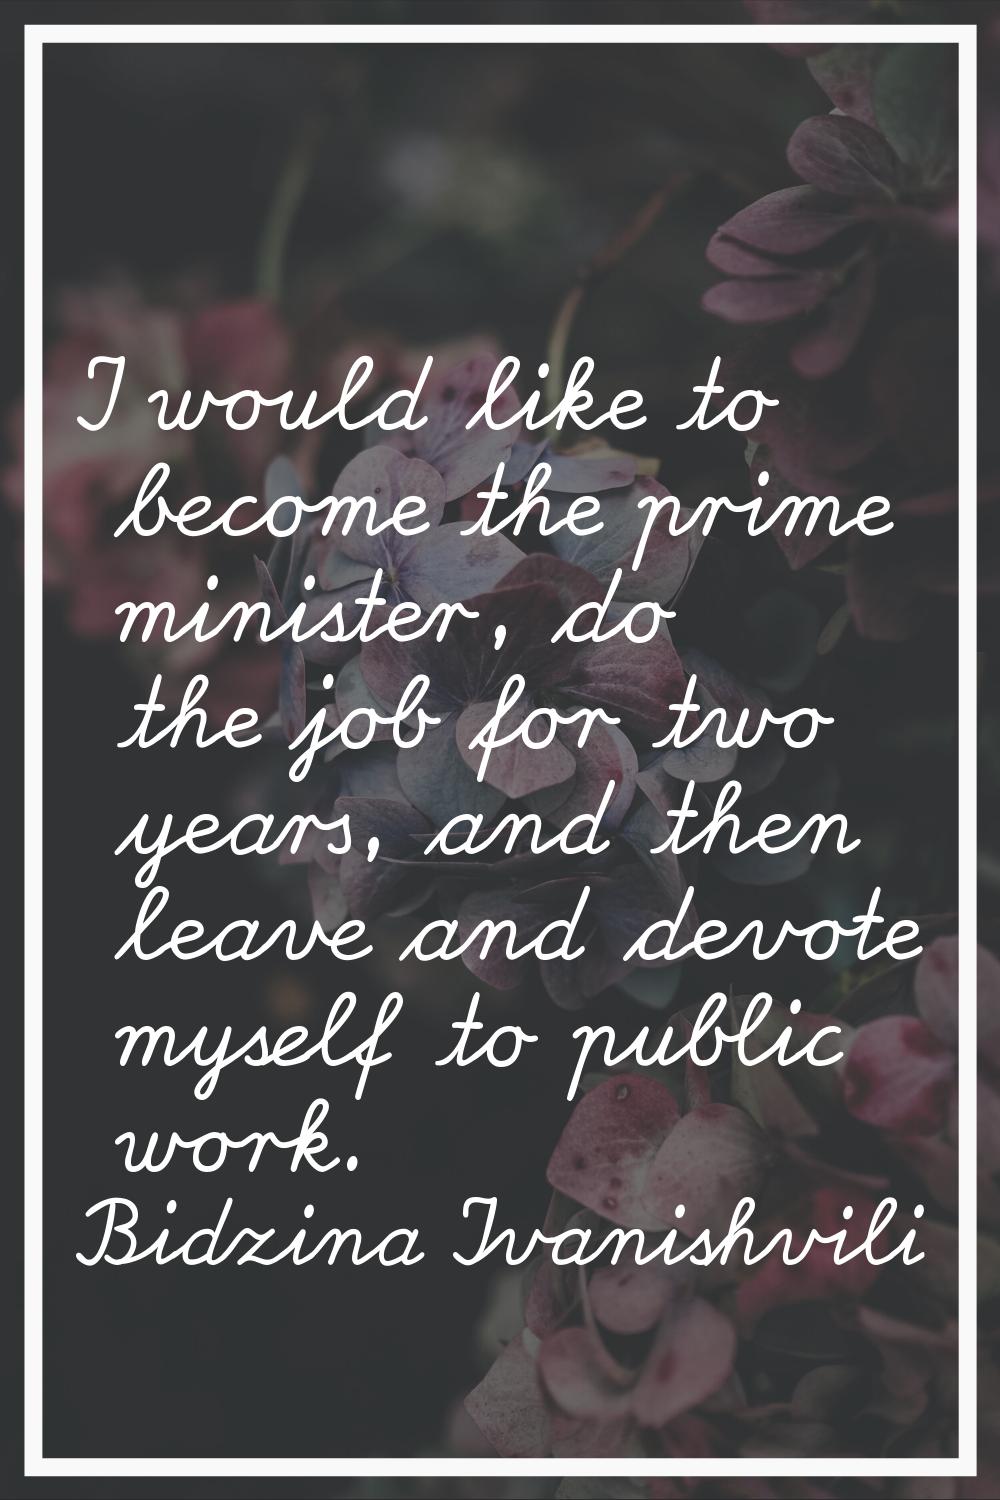 I would like to become the prime minister, do the job for two years, and then leave and devote myse